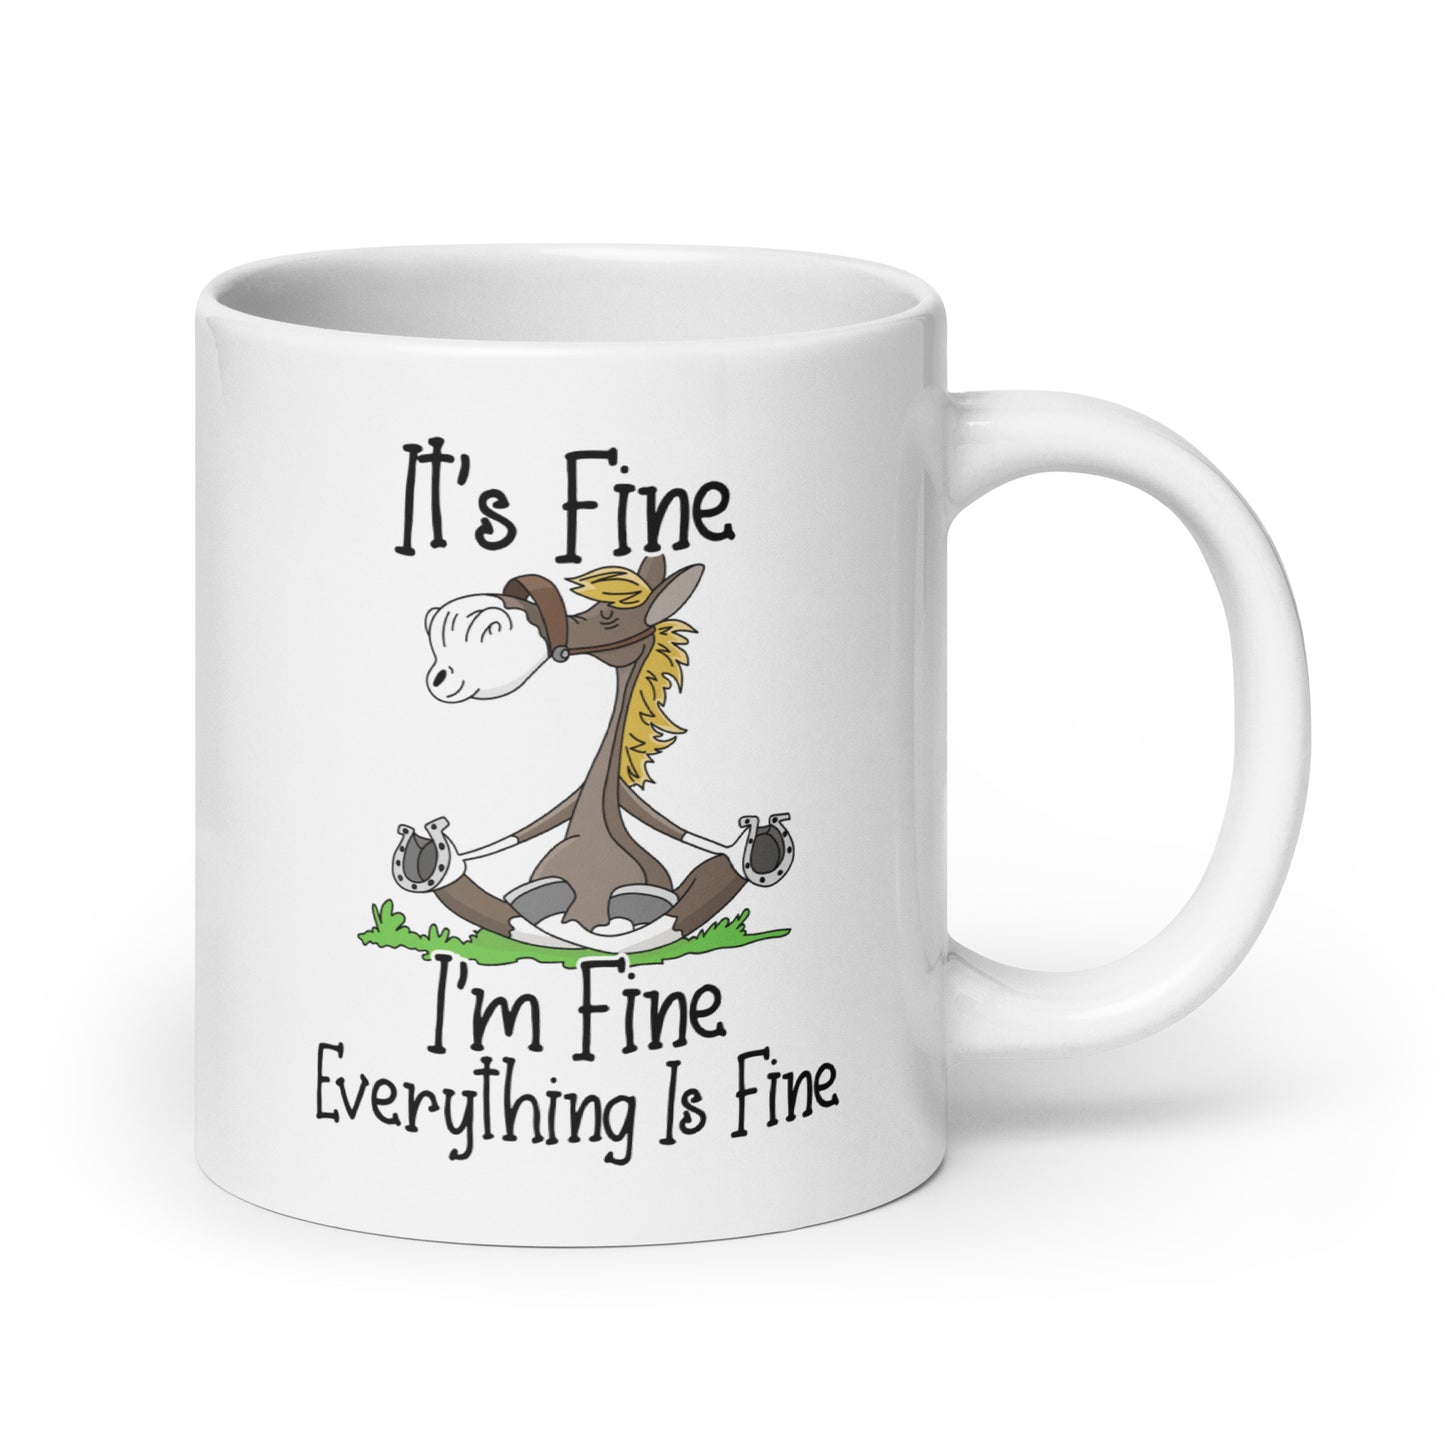 It's fine, I'm fine, Everything is Fine White Ceramic Coffee Mug with Horse